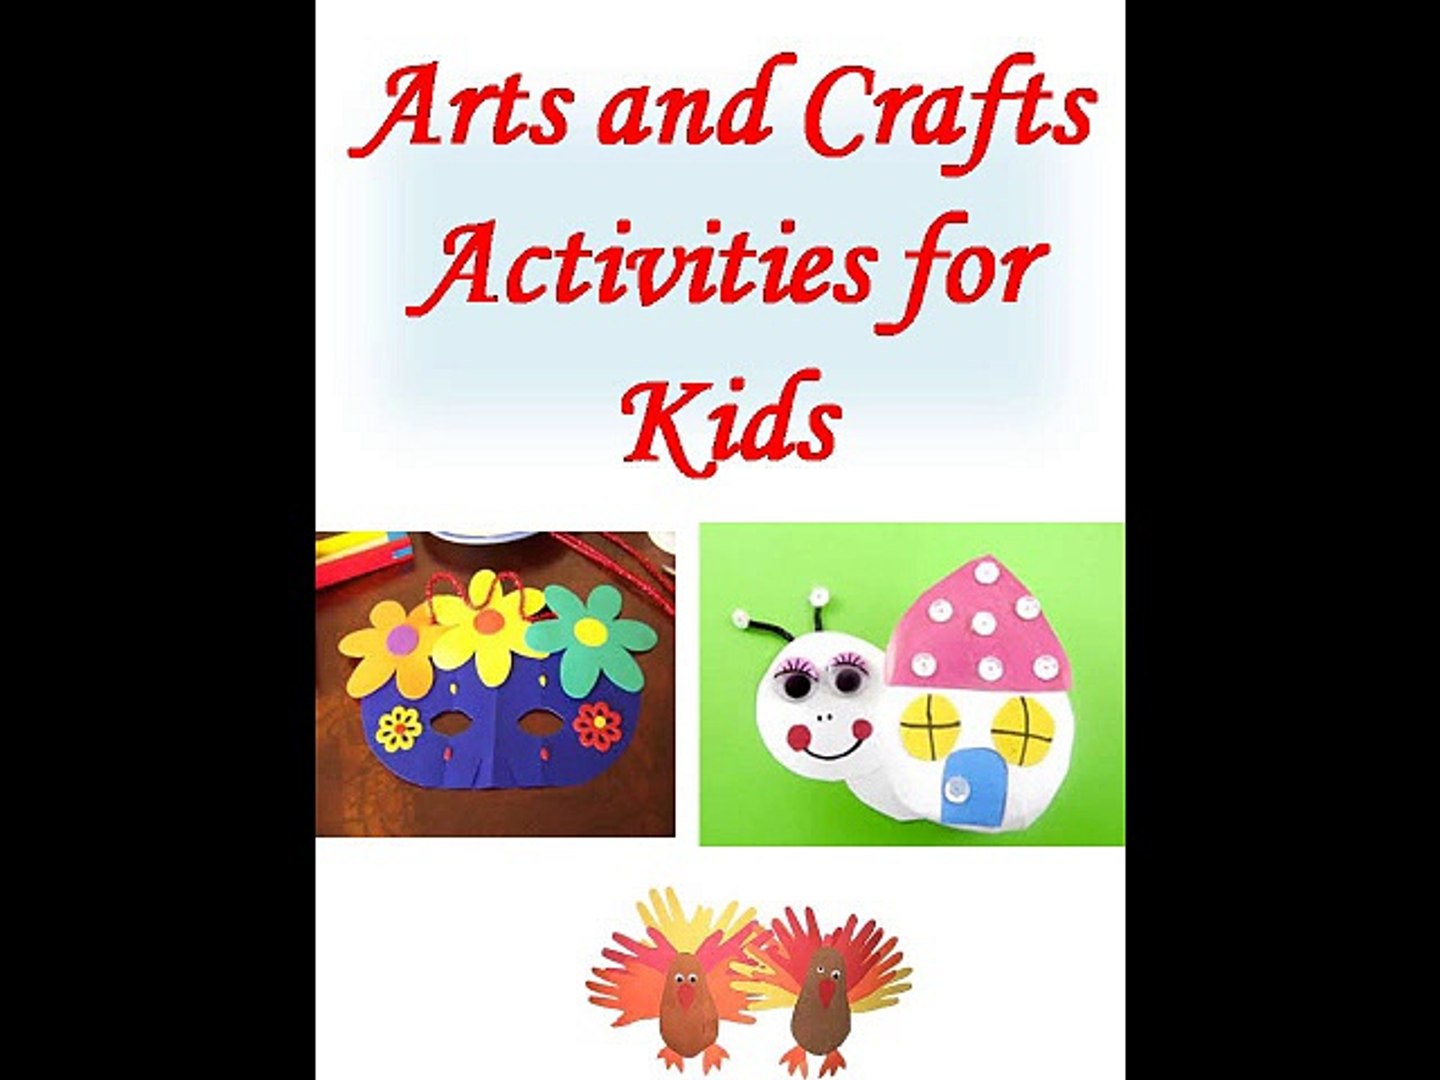 Arts and Crafts Activities for Kids